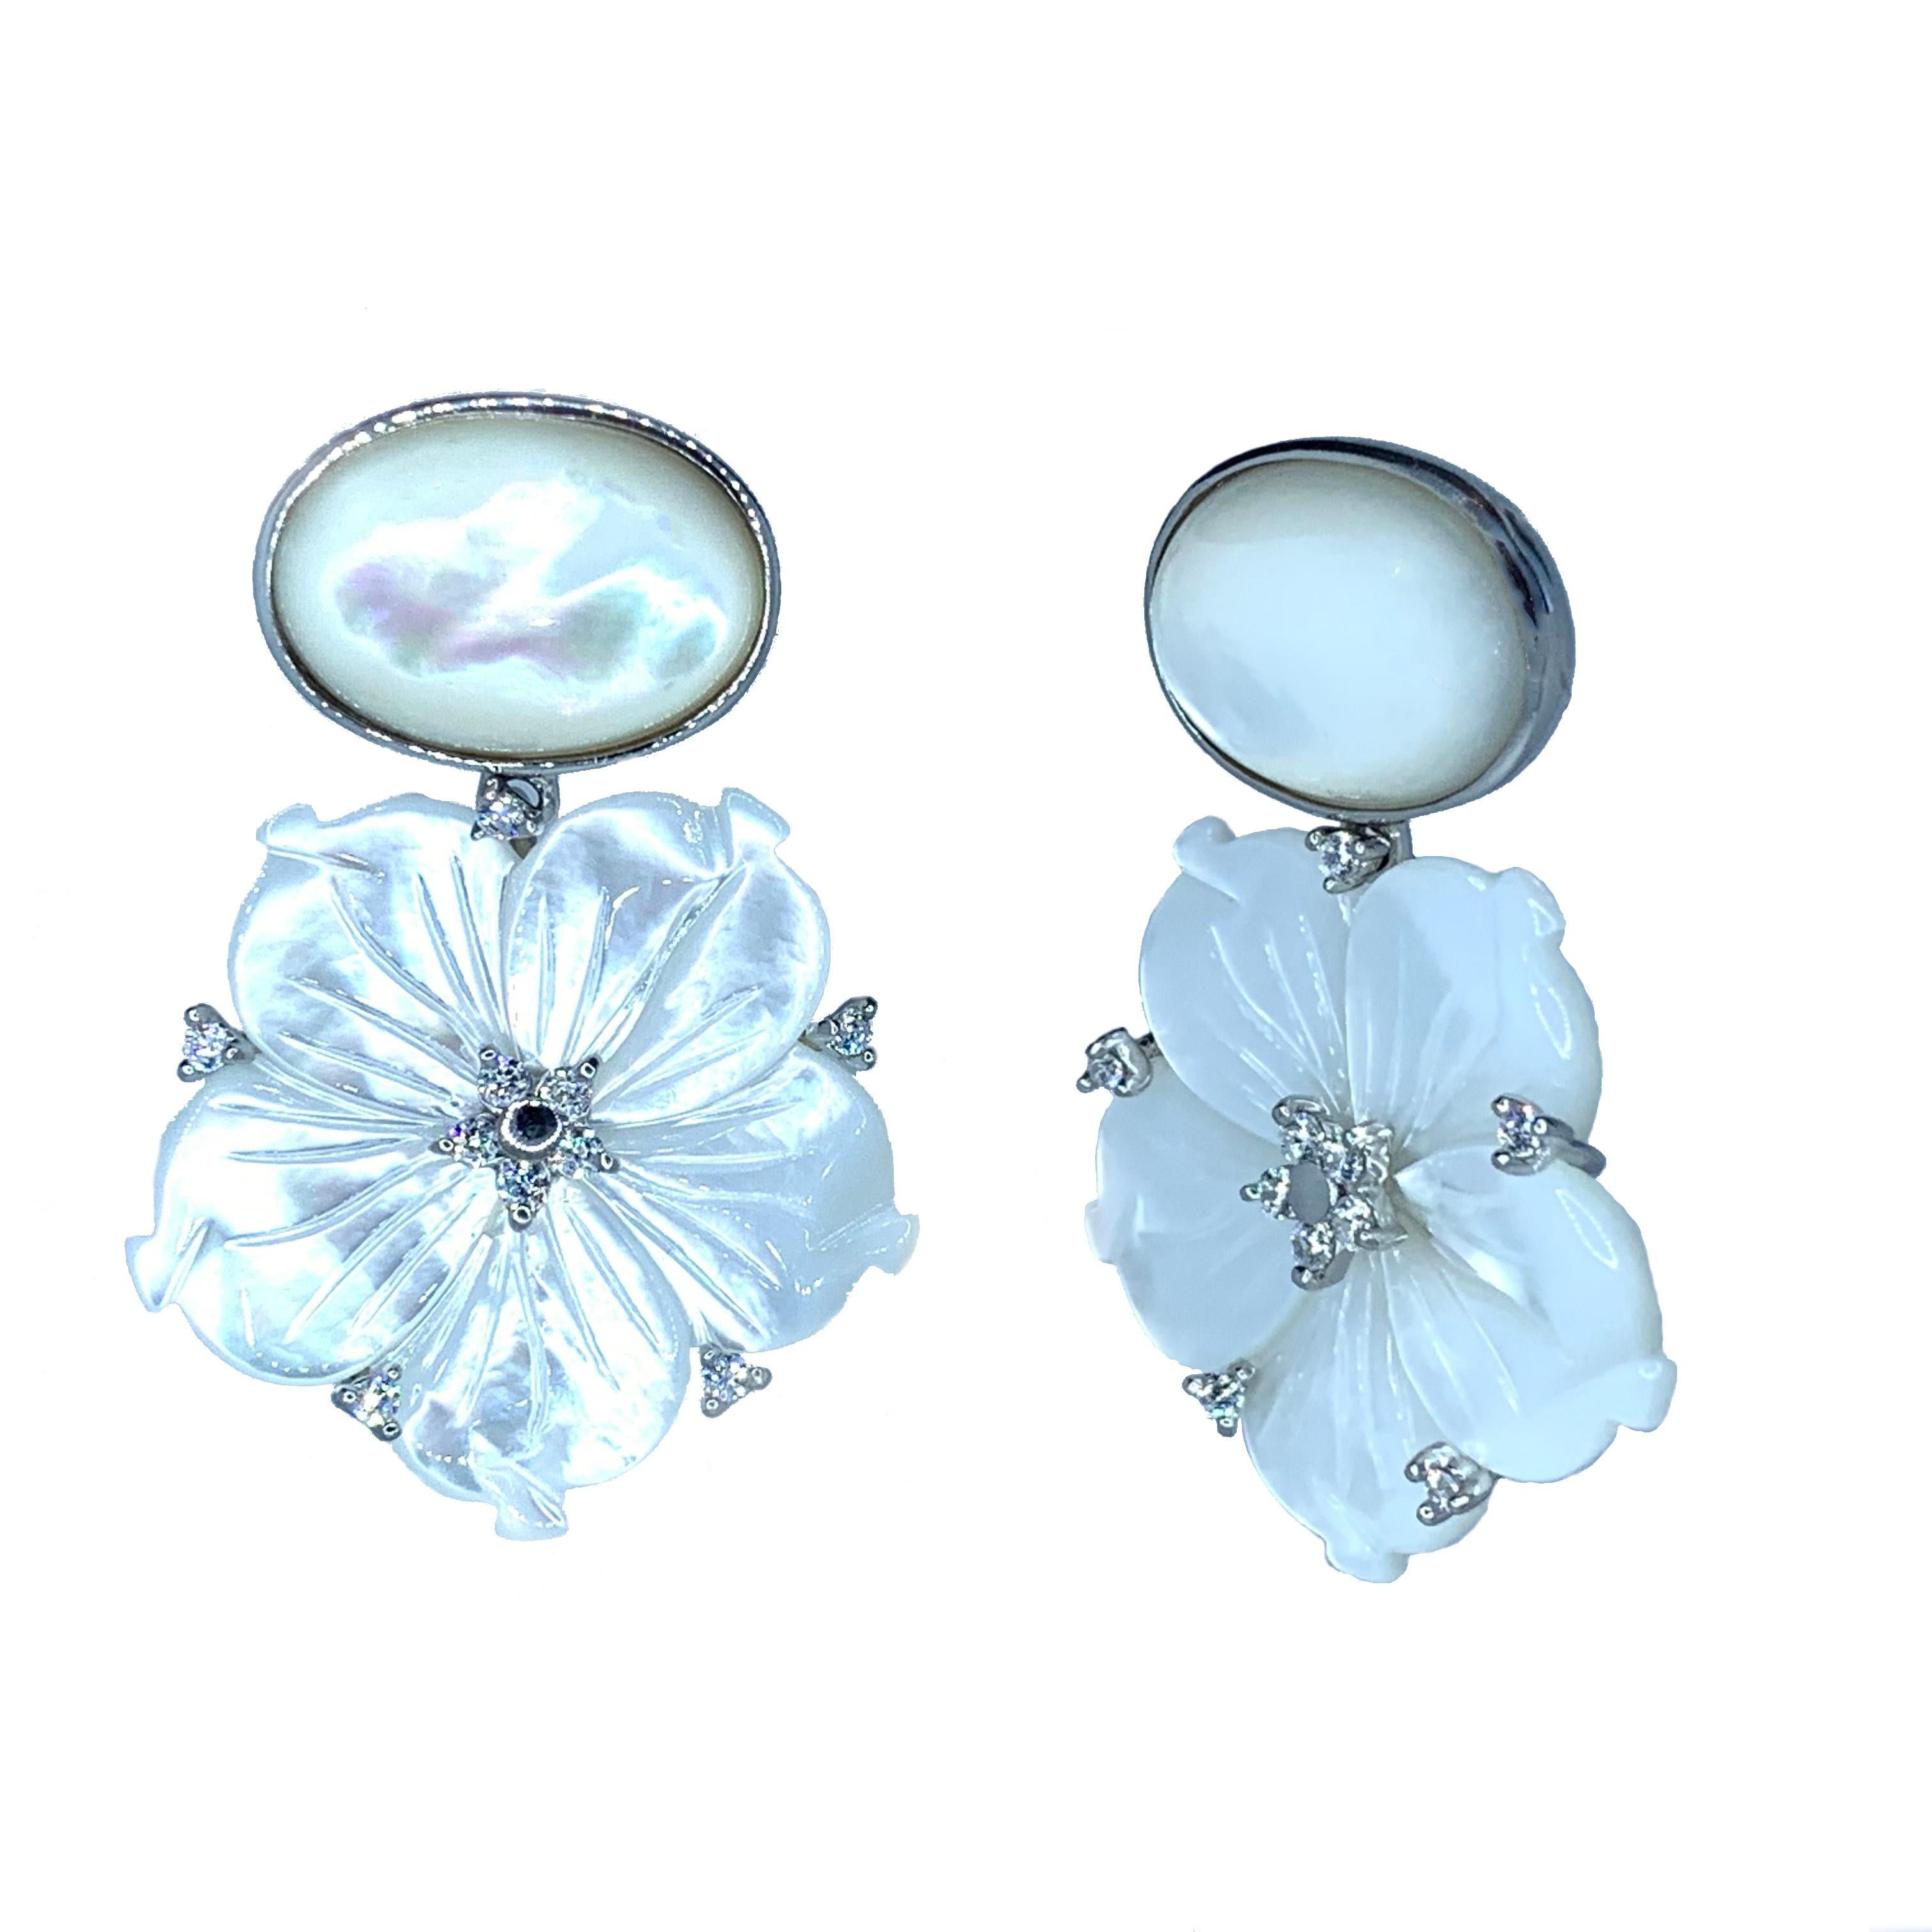 Stunning Oval Cabochon and Carved Flower Mother of Pearl Drop Earrings

This gorgeous pair of earrings features oval cabochon-cut mother of pearl and beautifully carved white mother of pearl flower, adorned with round simulated diamond, handset in